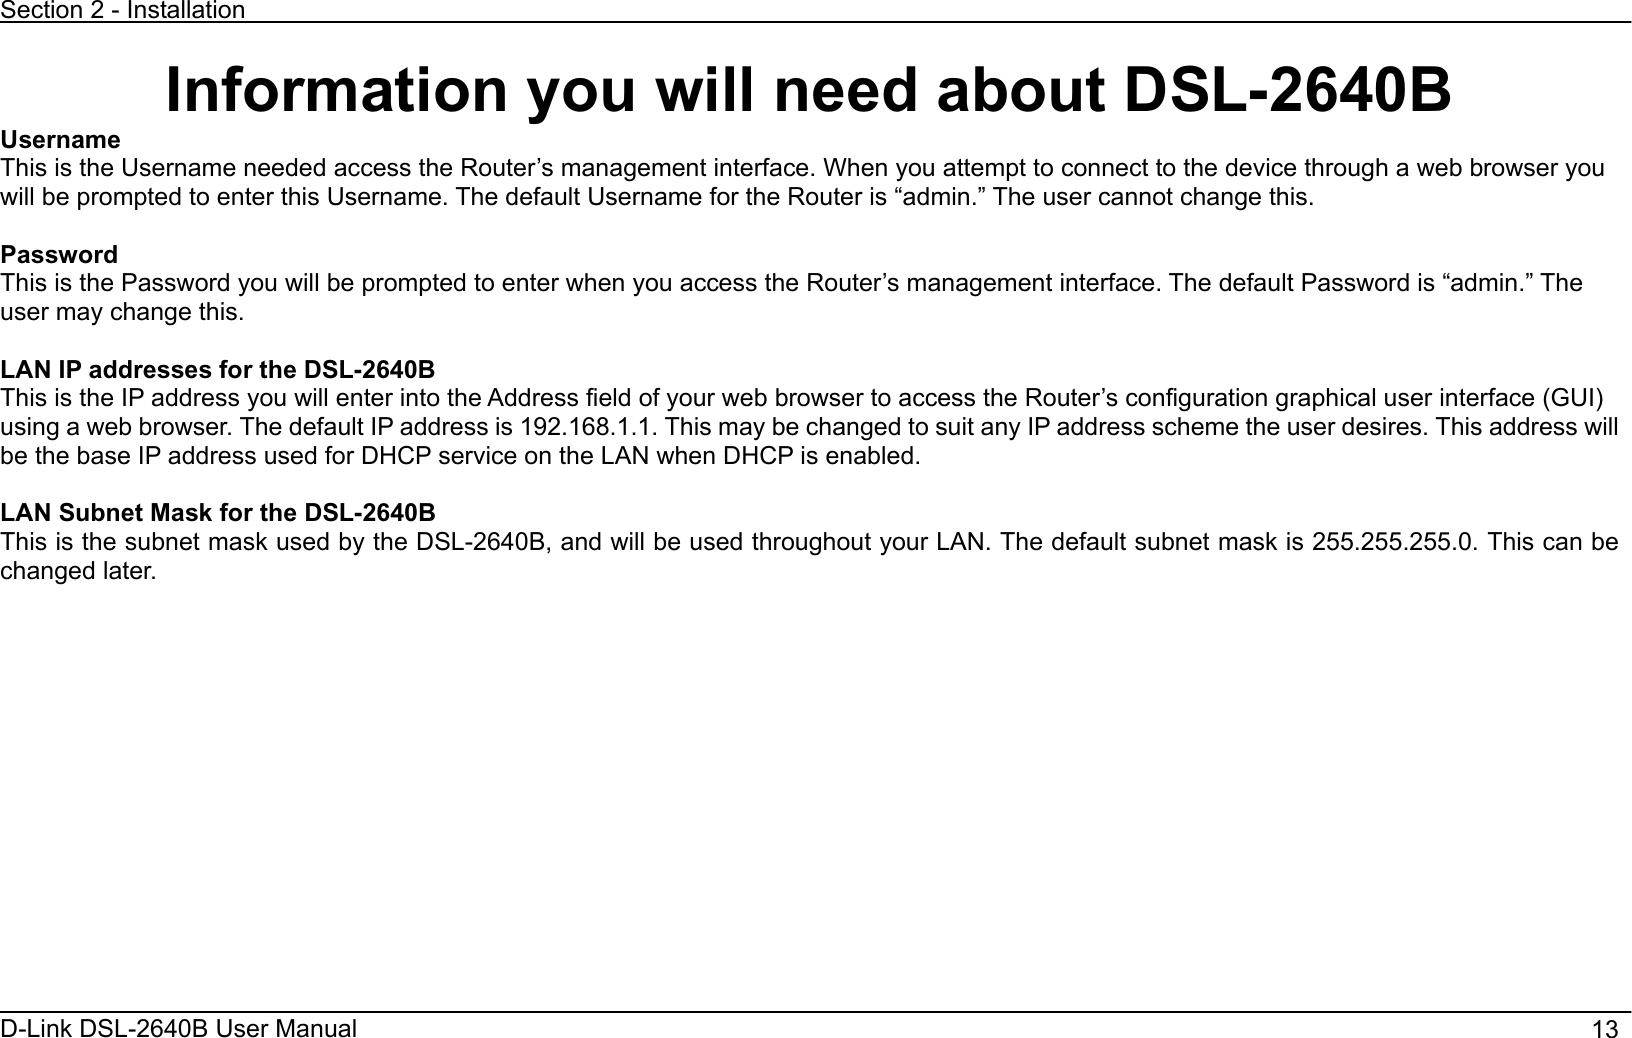 Section 2 - Installation D-Link DSL-2640B User Manual                                       13Information you will need about DSL-2640B UsernameThis is the Username needed access the Router’s management interface. When you attempt to connect to the device through a web browser you will be prompted to enter this Username. The default Username for the Router is “admin.” The user cannot change this.   Password This is the Password you will be prompted to enter when you access the Router’s management interface. The default Password is “admin.” The user may change this.  LAN IP addresses for the DSL-2640B This is the IP address you will enter into the Address field of your web browser to access the Router’s configuration graphical user interface (GUI) using a web browser. The default IP address is 192.168.1.1. This may be changed to suit any IP address scheme the user desires. This address will be the base IP address used for DHCP service on the LAN when DHCP is enabled.   LAN Subnet Mask for the DSL-2640B This is the subnet mask used by the DSL-2640B, and will be used throughout your LAN. The default subnet mask is 255.255.255.0. This can be changed later.   